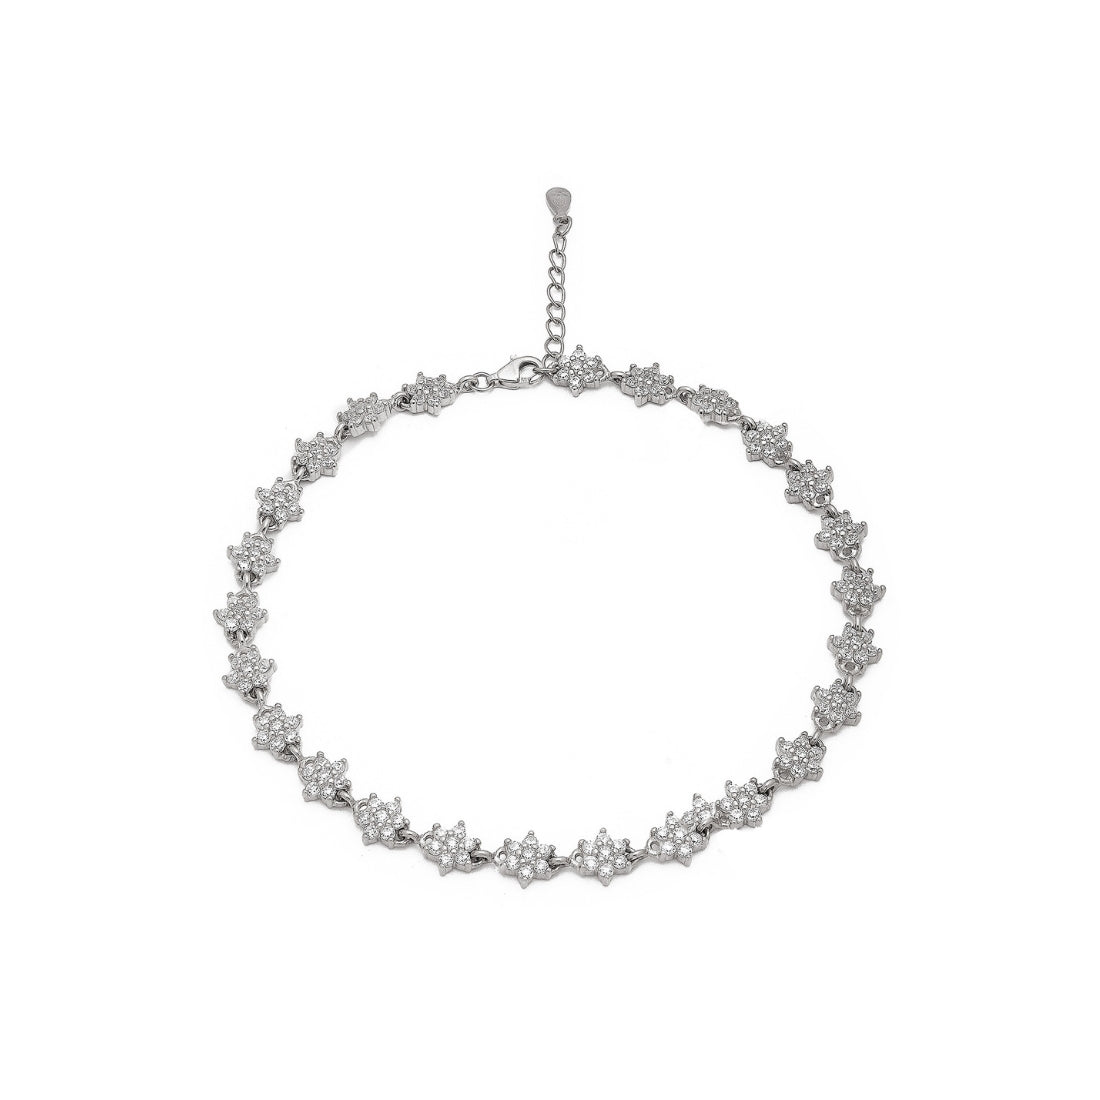 Blooming Beauty 925 Sterling Silver Rhodium-Plated Flower Anklet